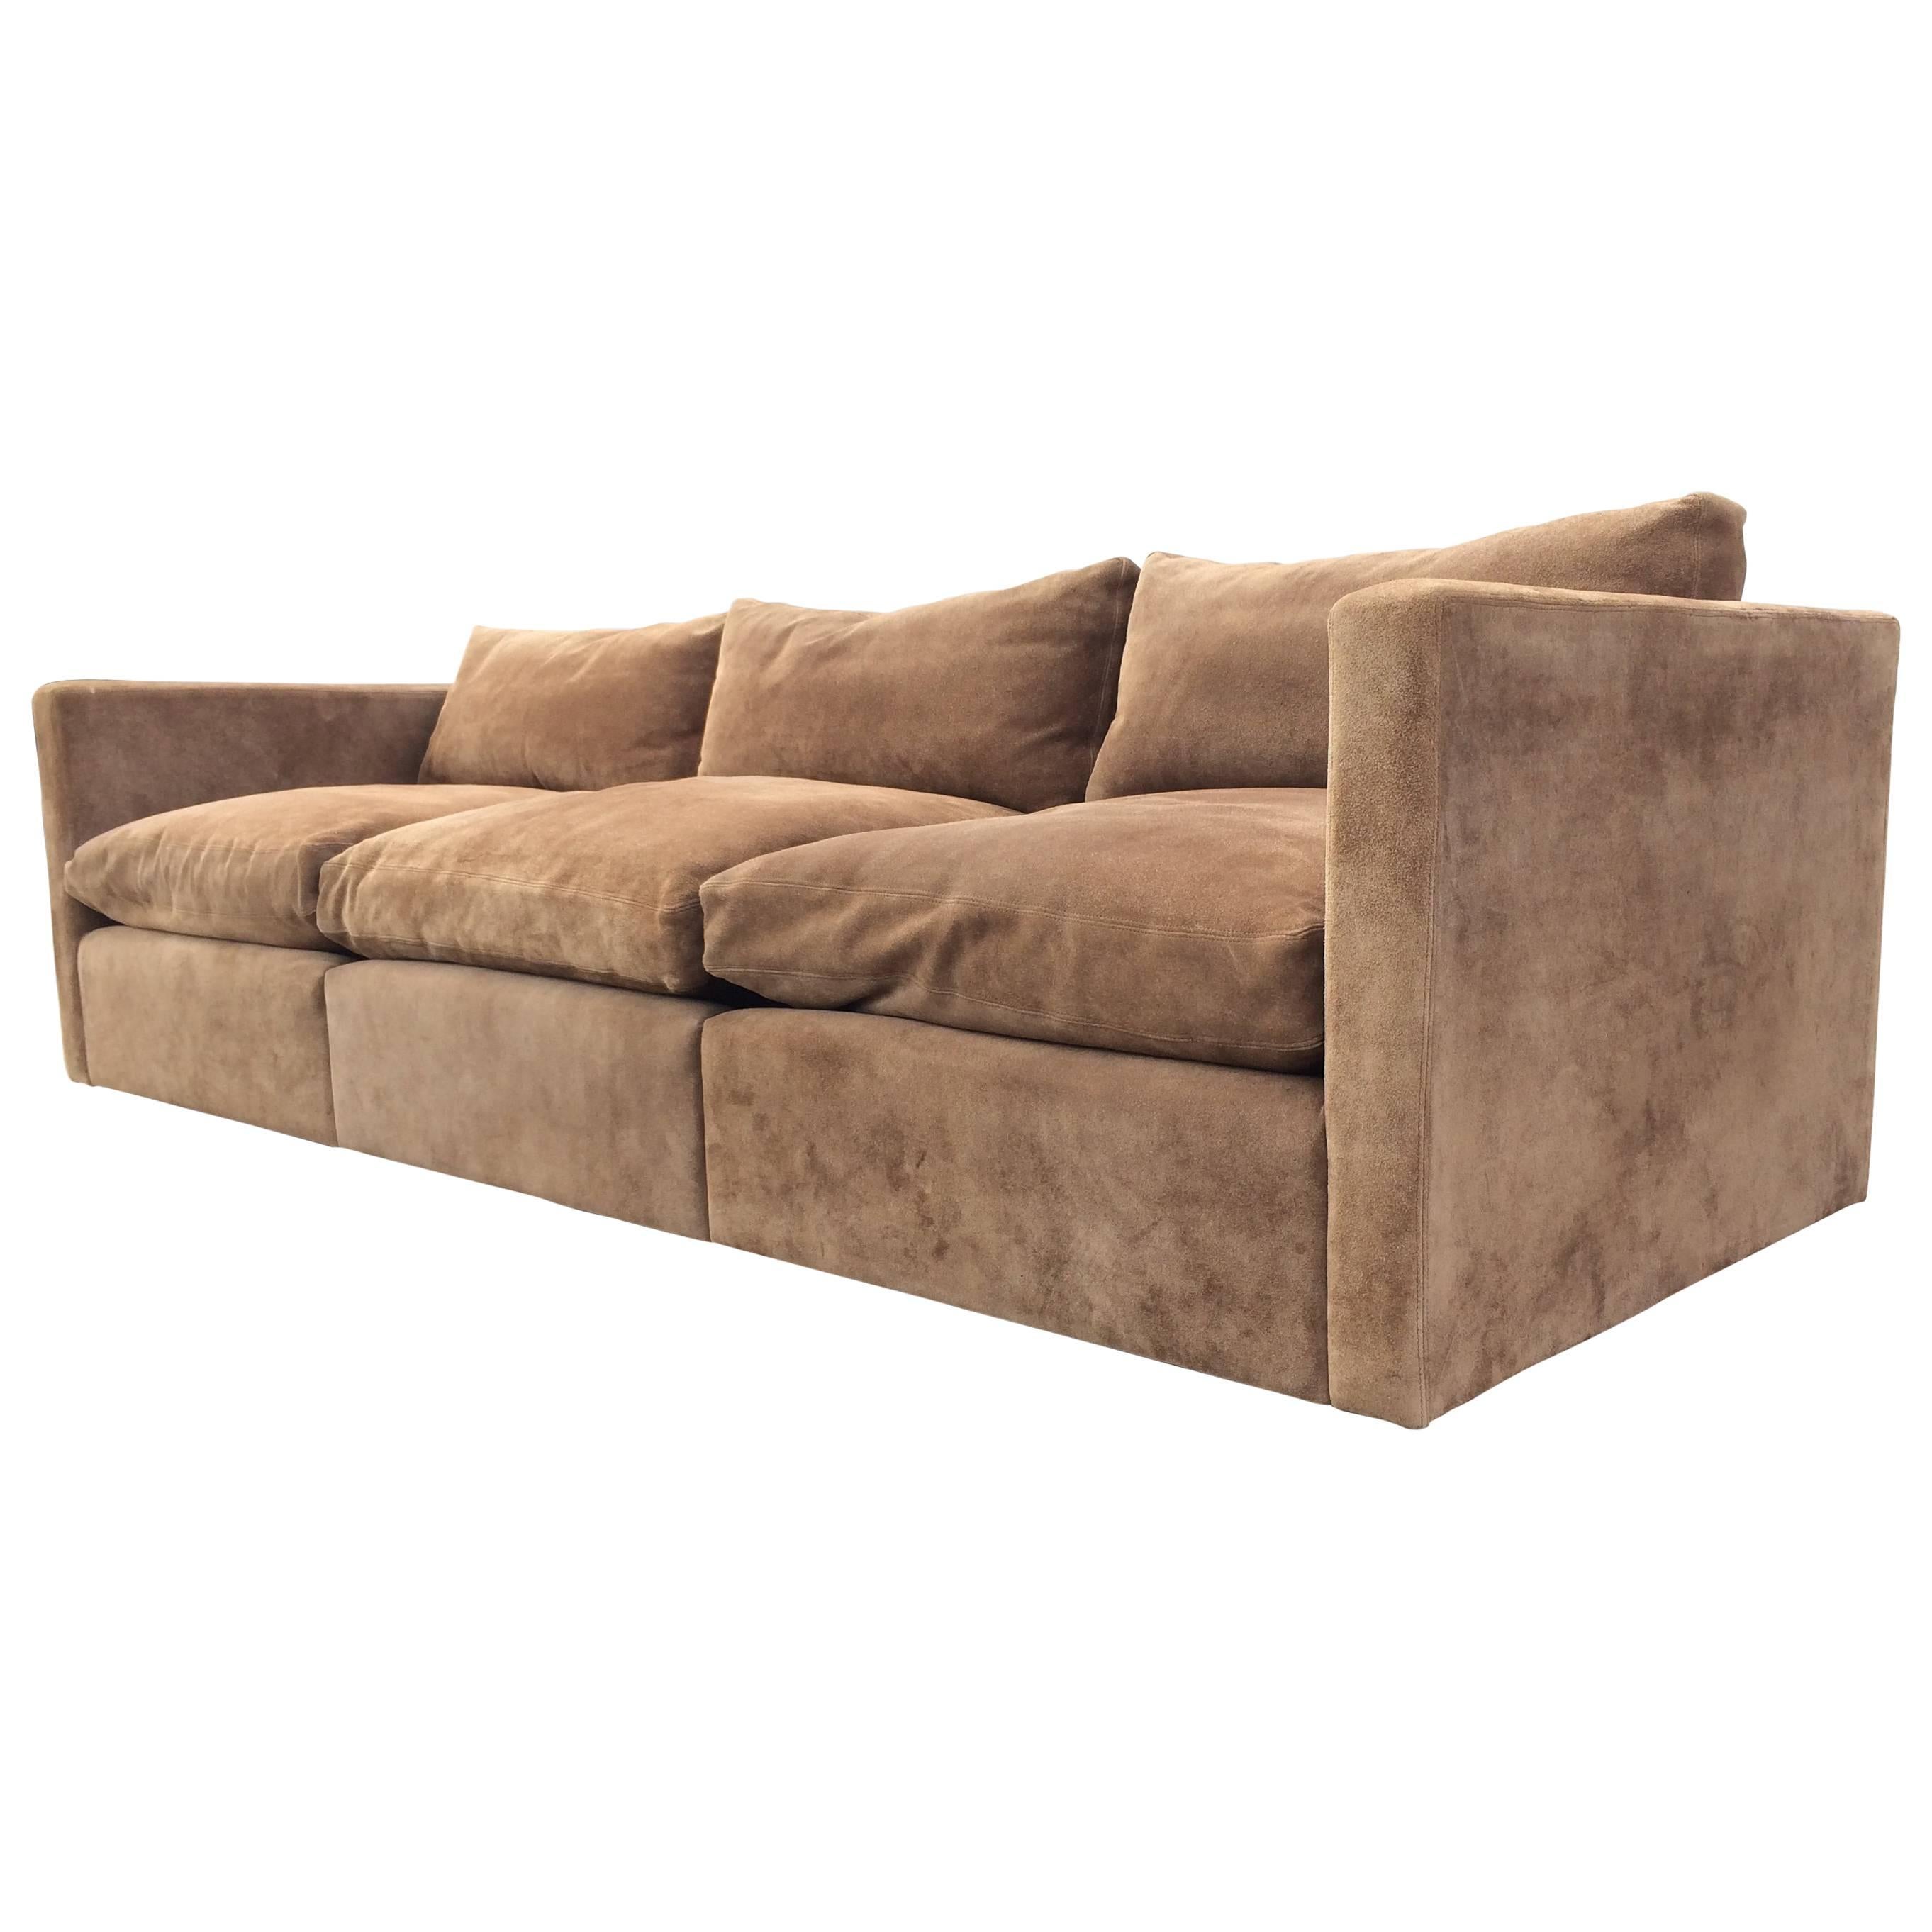 Suede Leather Sofa by Charles Pfister for Knoll